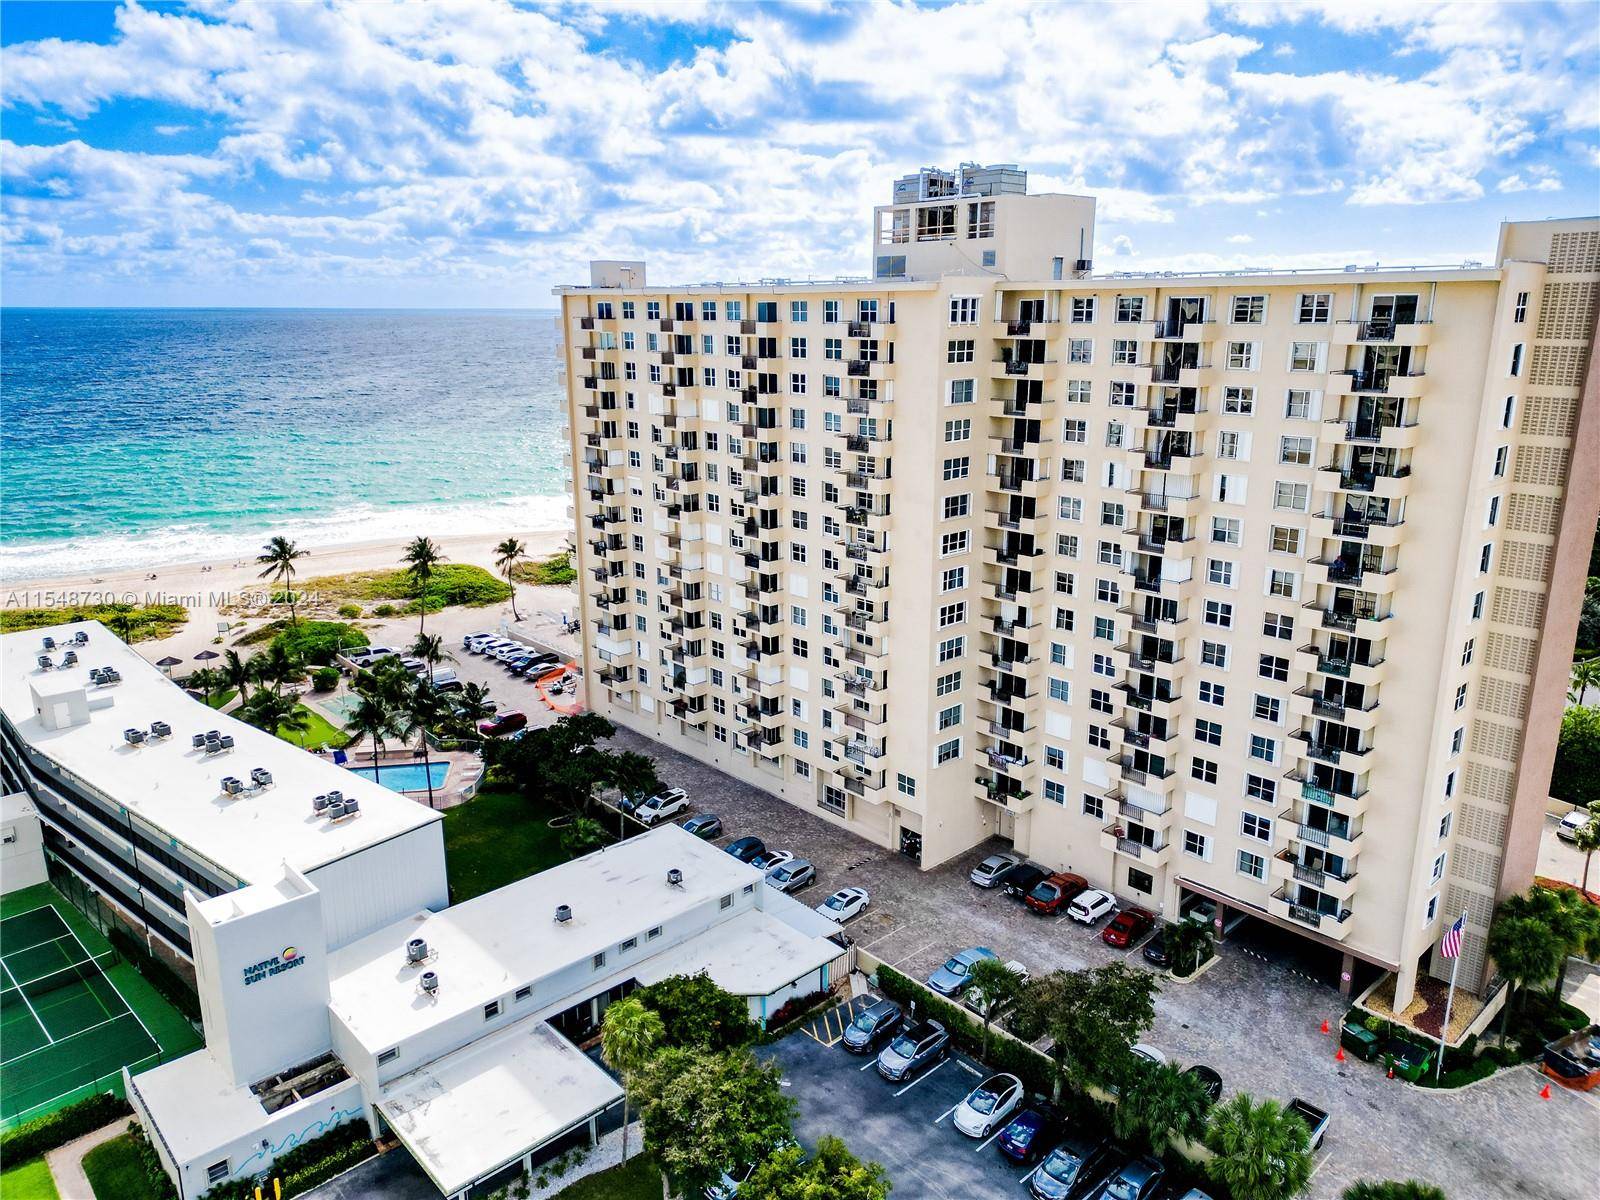 Yearly rental. Escape to the luxurious lifestyle you deserve in a stunning newly renovated 2 bed, 2 bath condo in the prestigious Lauderdale By The Sea neighborhood.